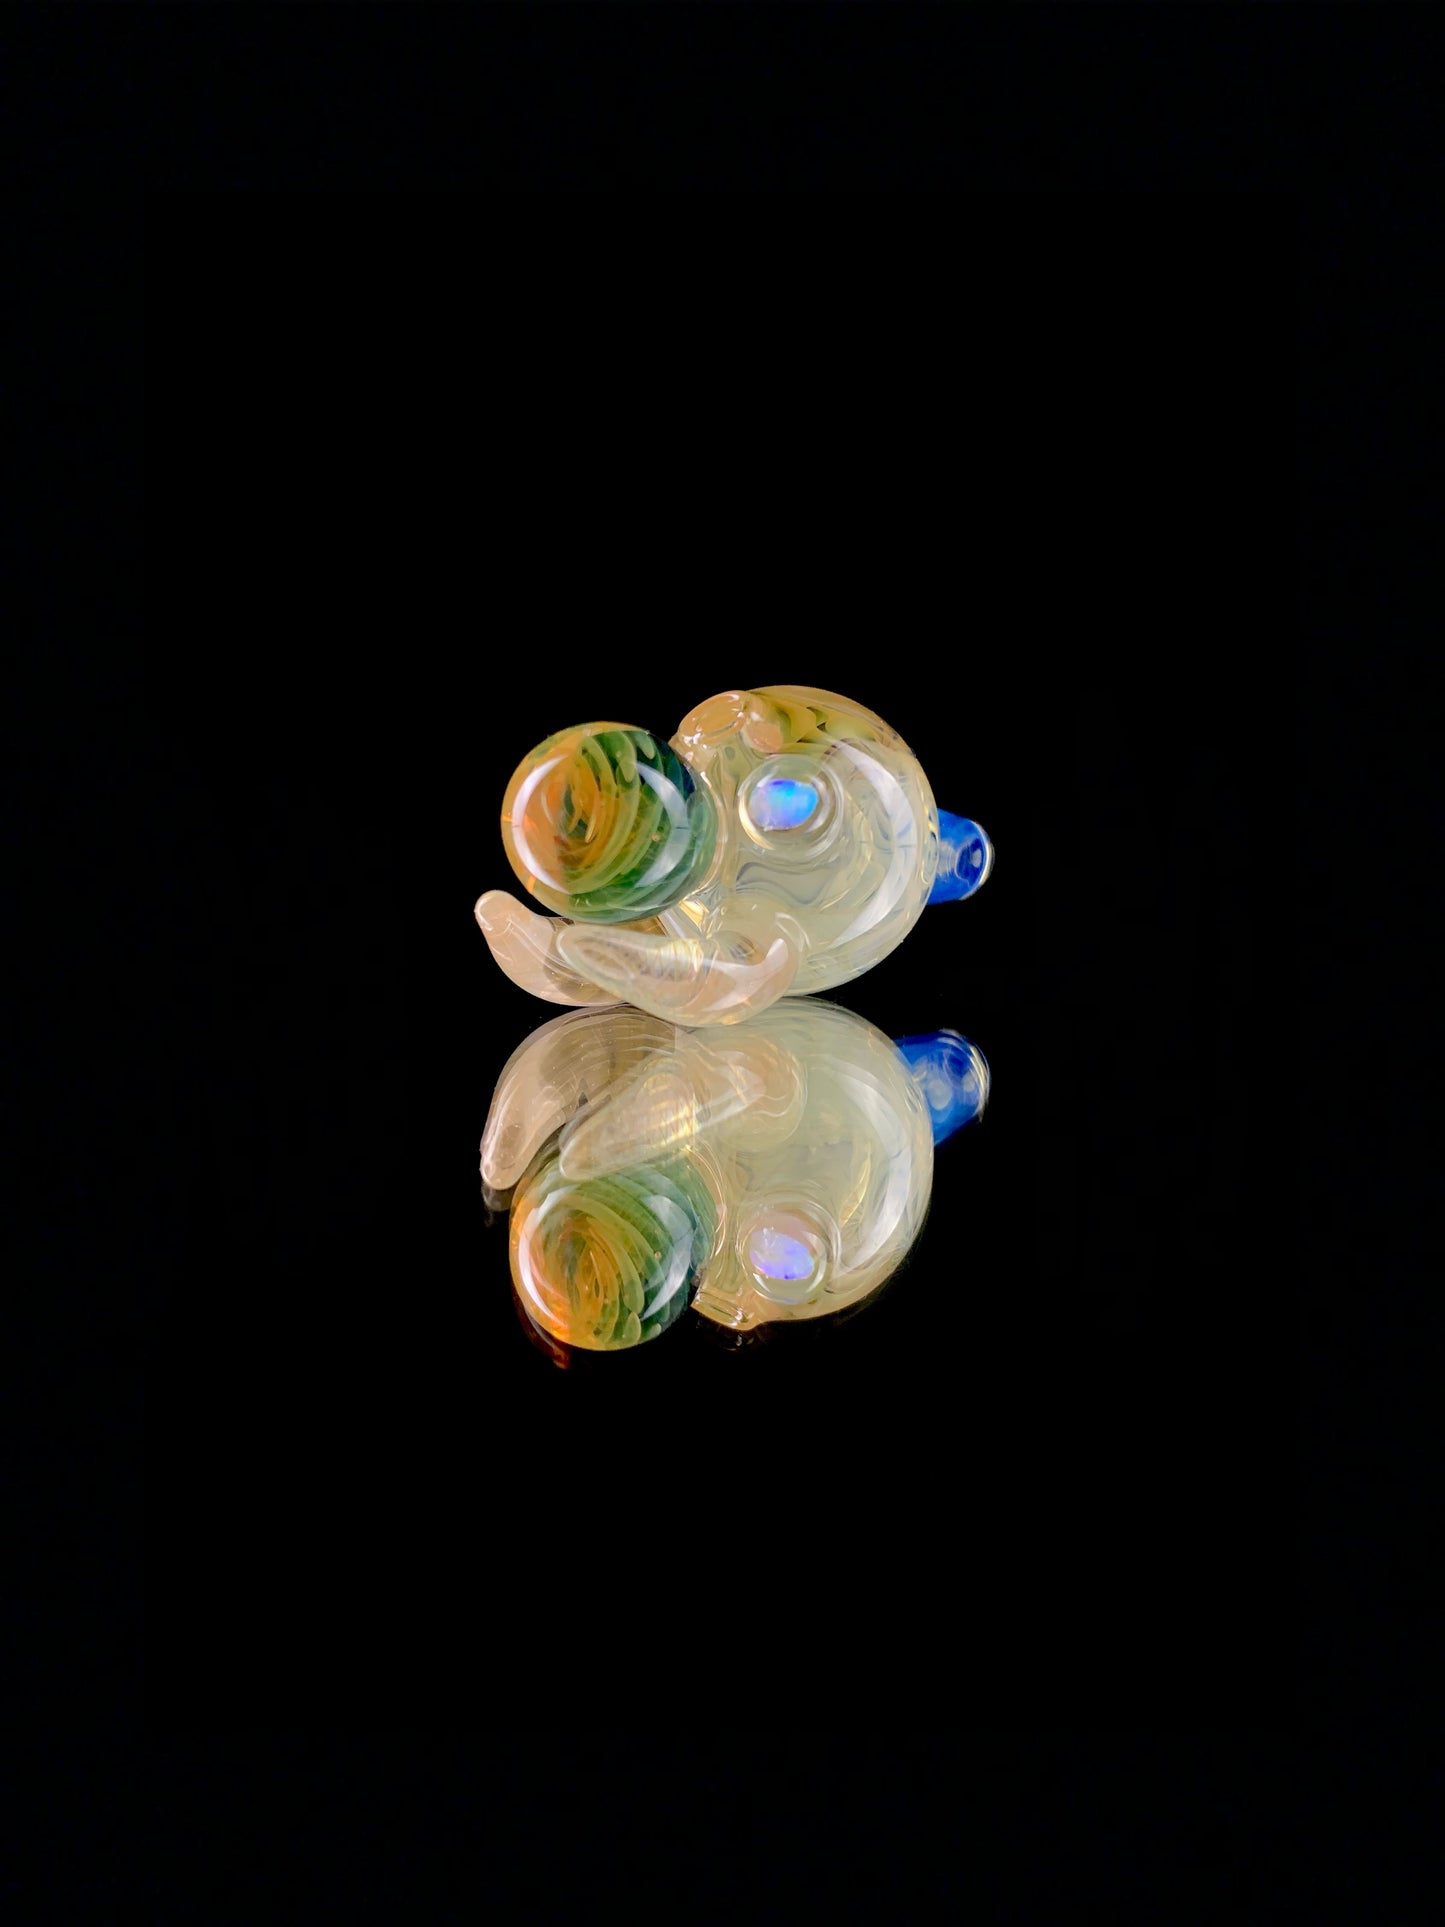 25mm fume bubble cap by Phase Glass